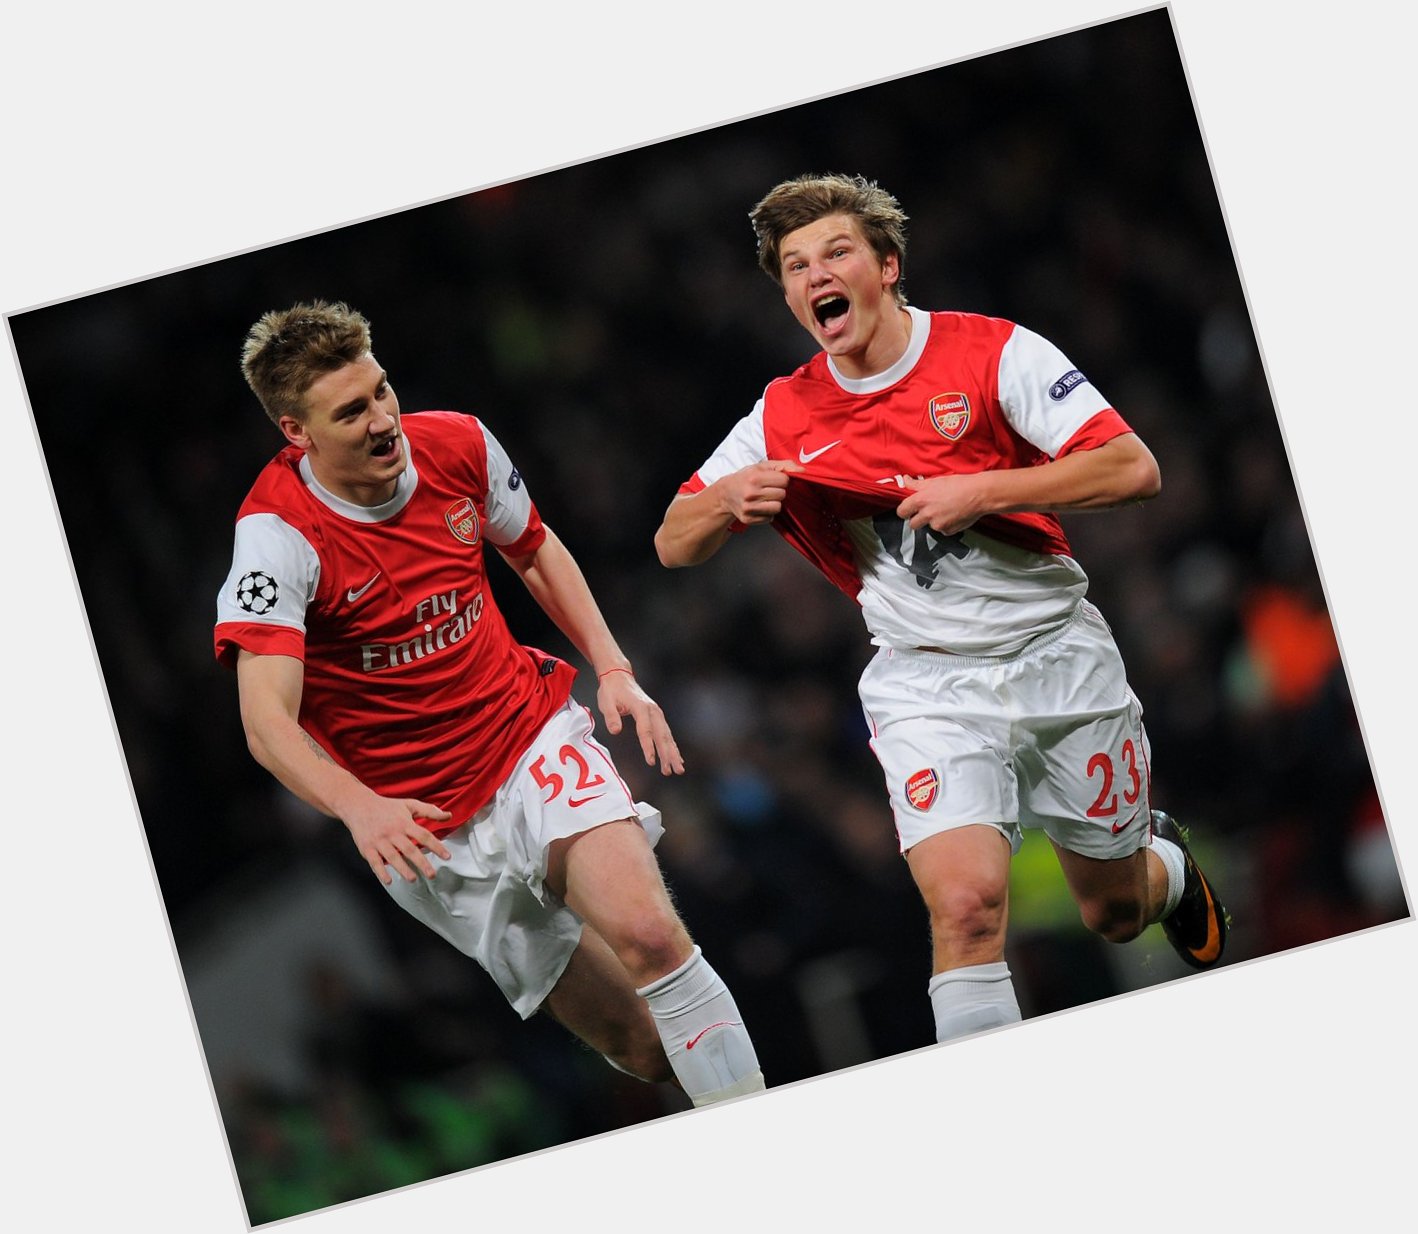 Happy birthday to former Arsenal winger Andrey Arshavin, who turns 36 today! 